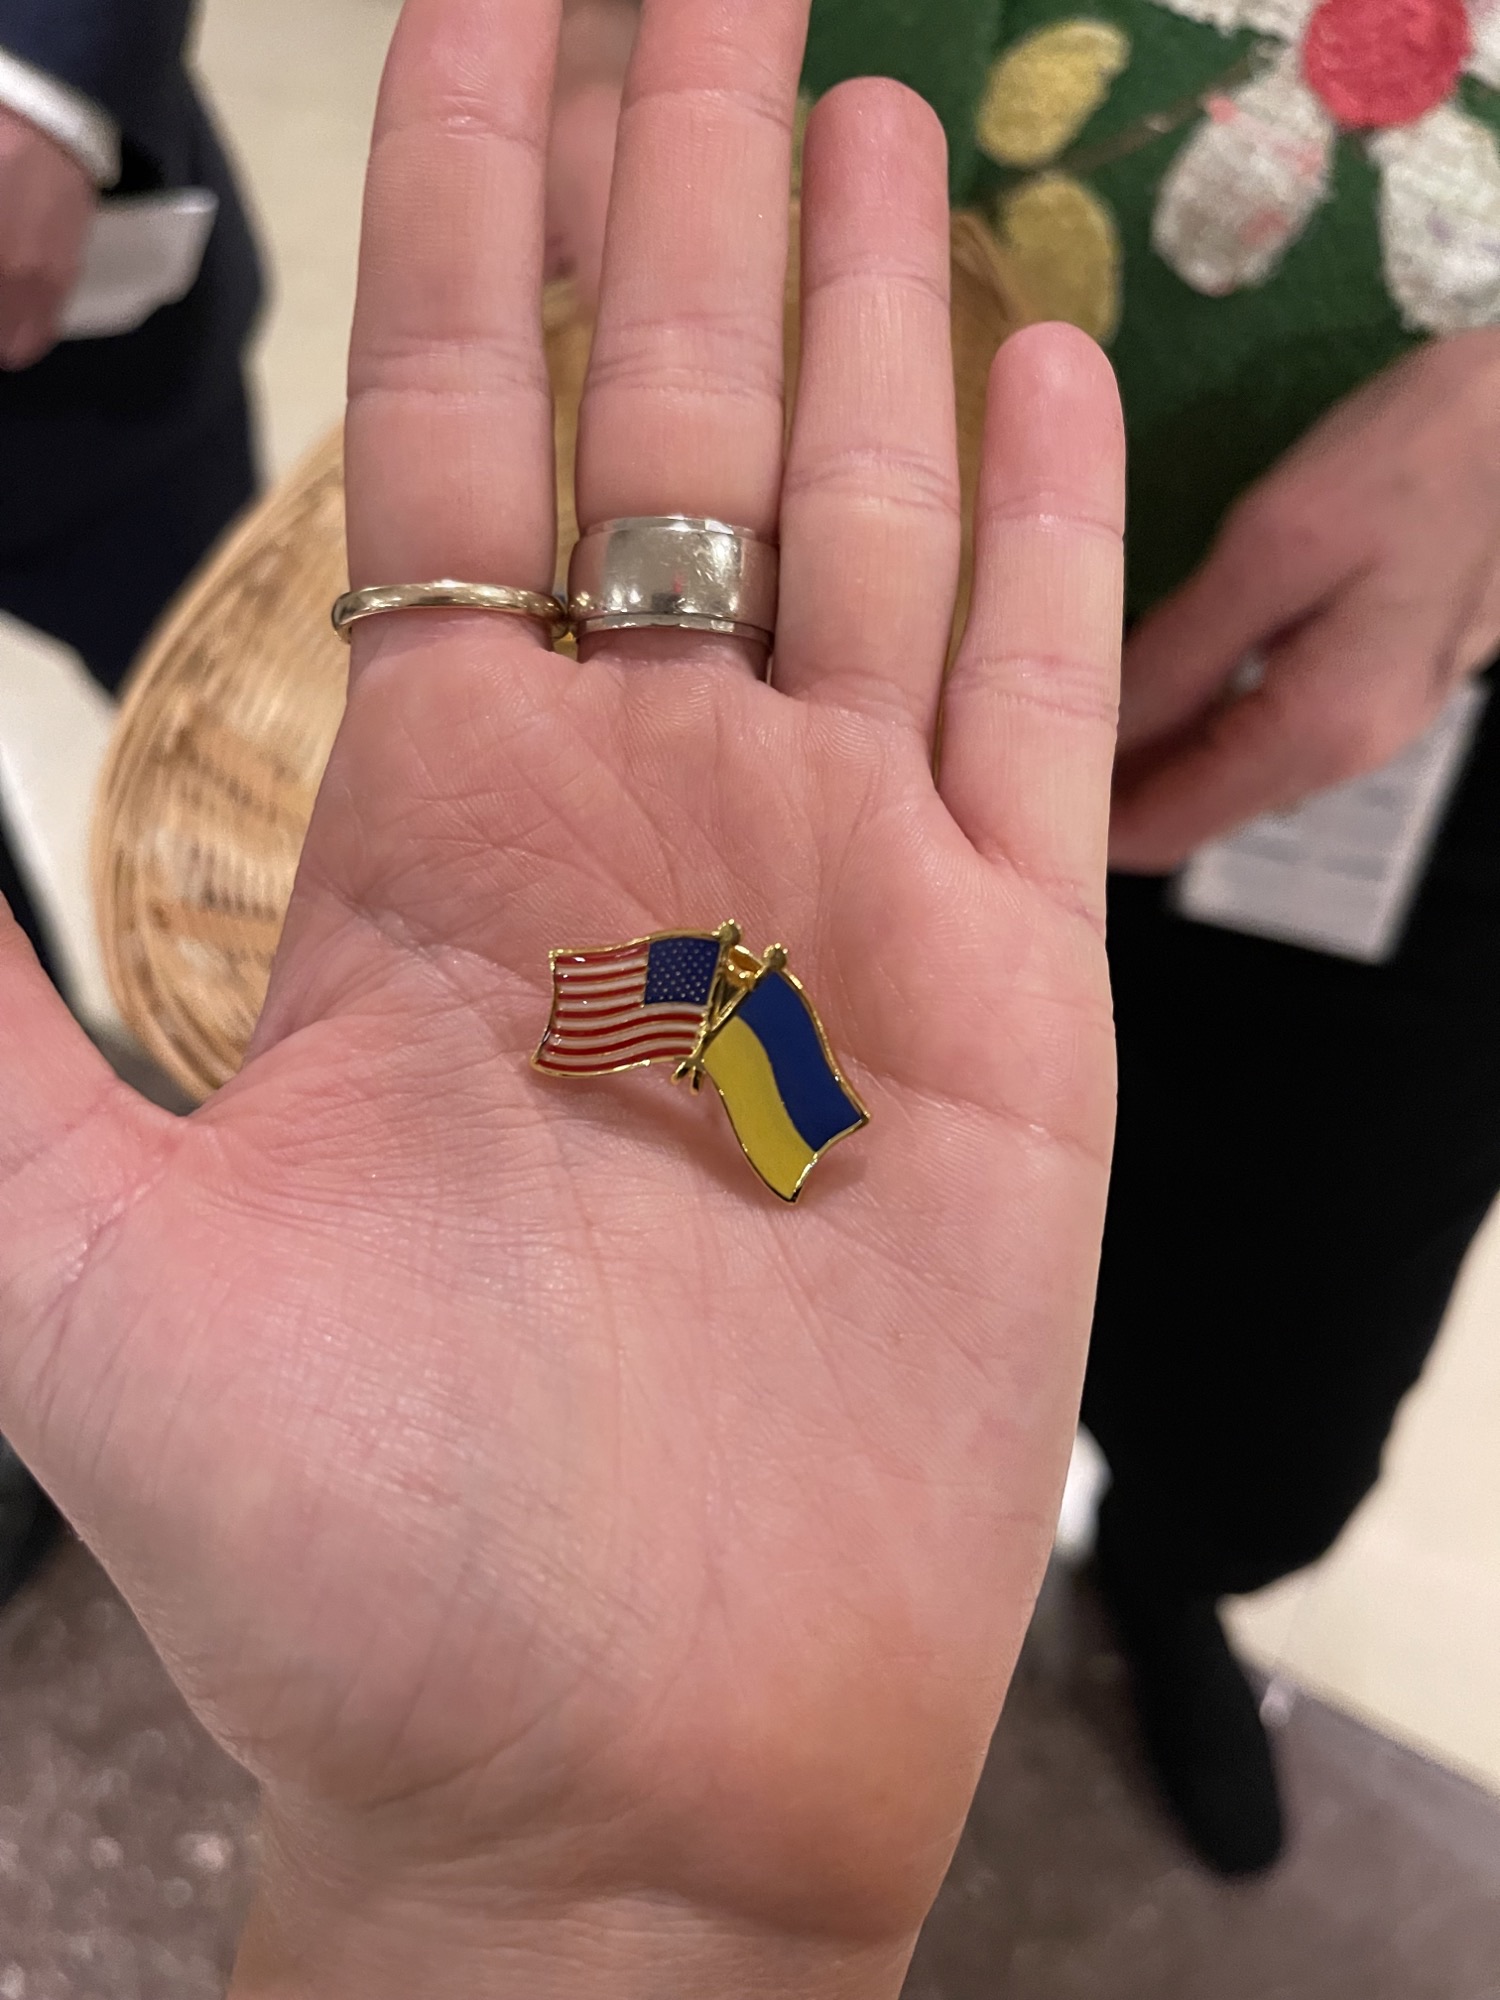 Capitol staffer handed out Ukraine-US flag pins to lawmakers attending Zelensky's address at the Capitol on March 16.